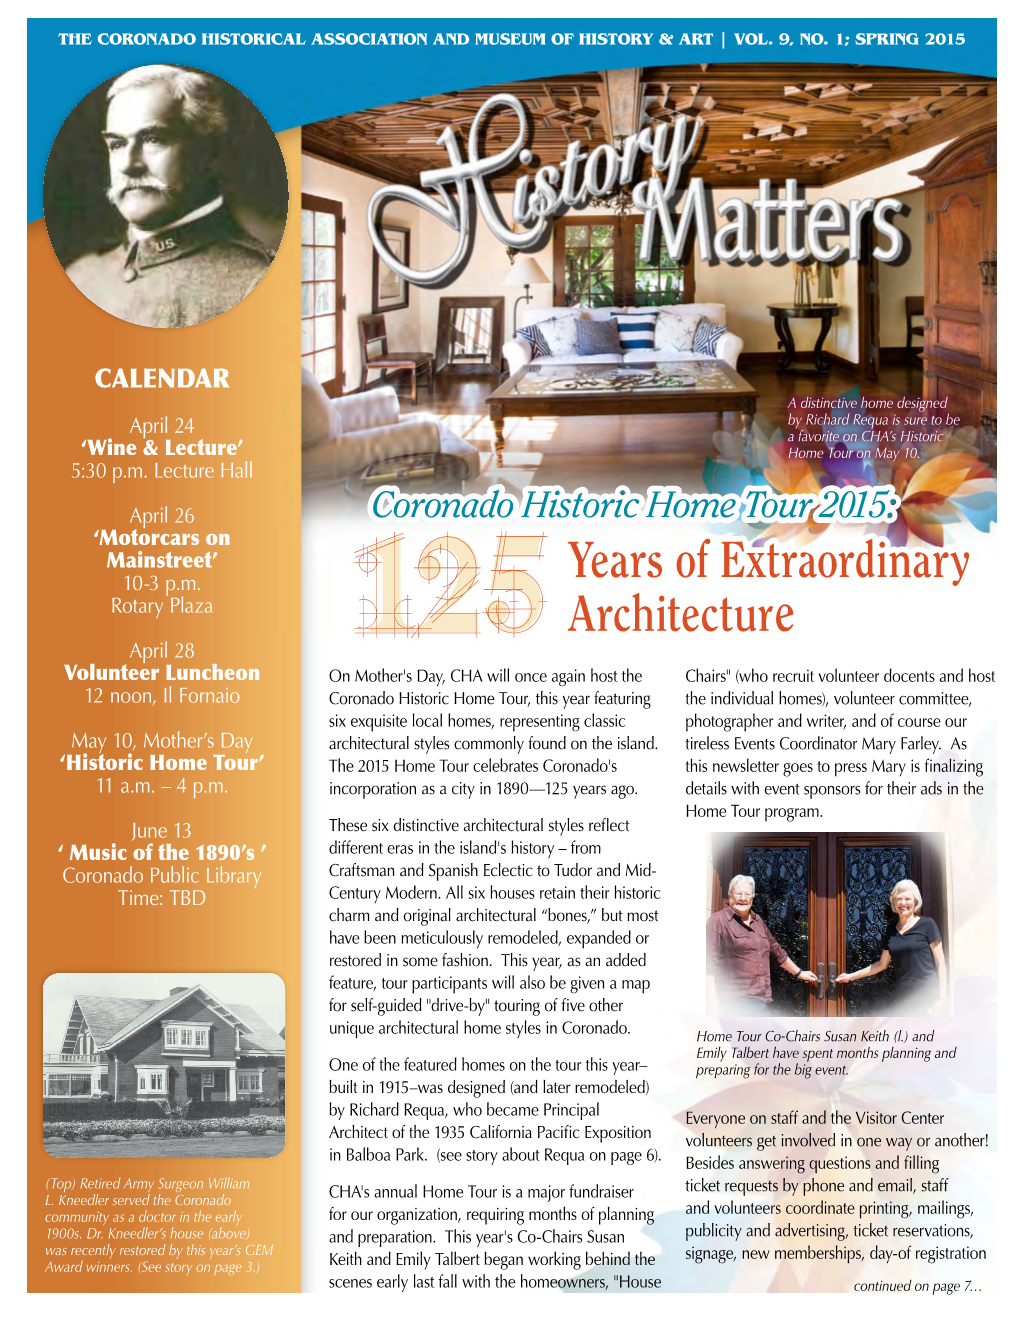 Coronado Historic Home Tour 2015: Years of Extraordinary Architecture Sunday, May 10, 2015 Mother’S Day, 11 A.M